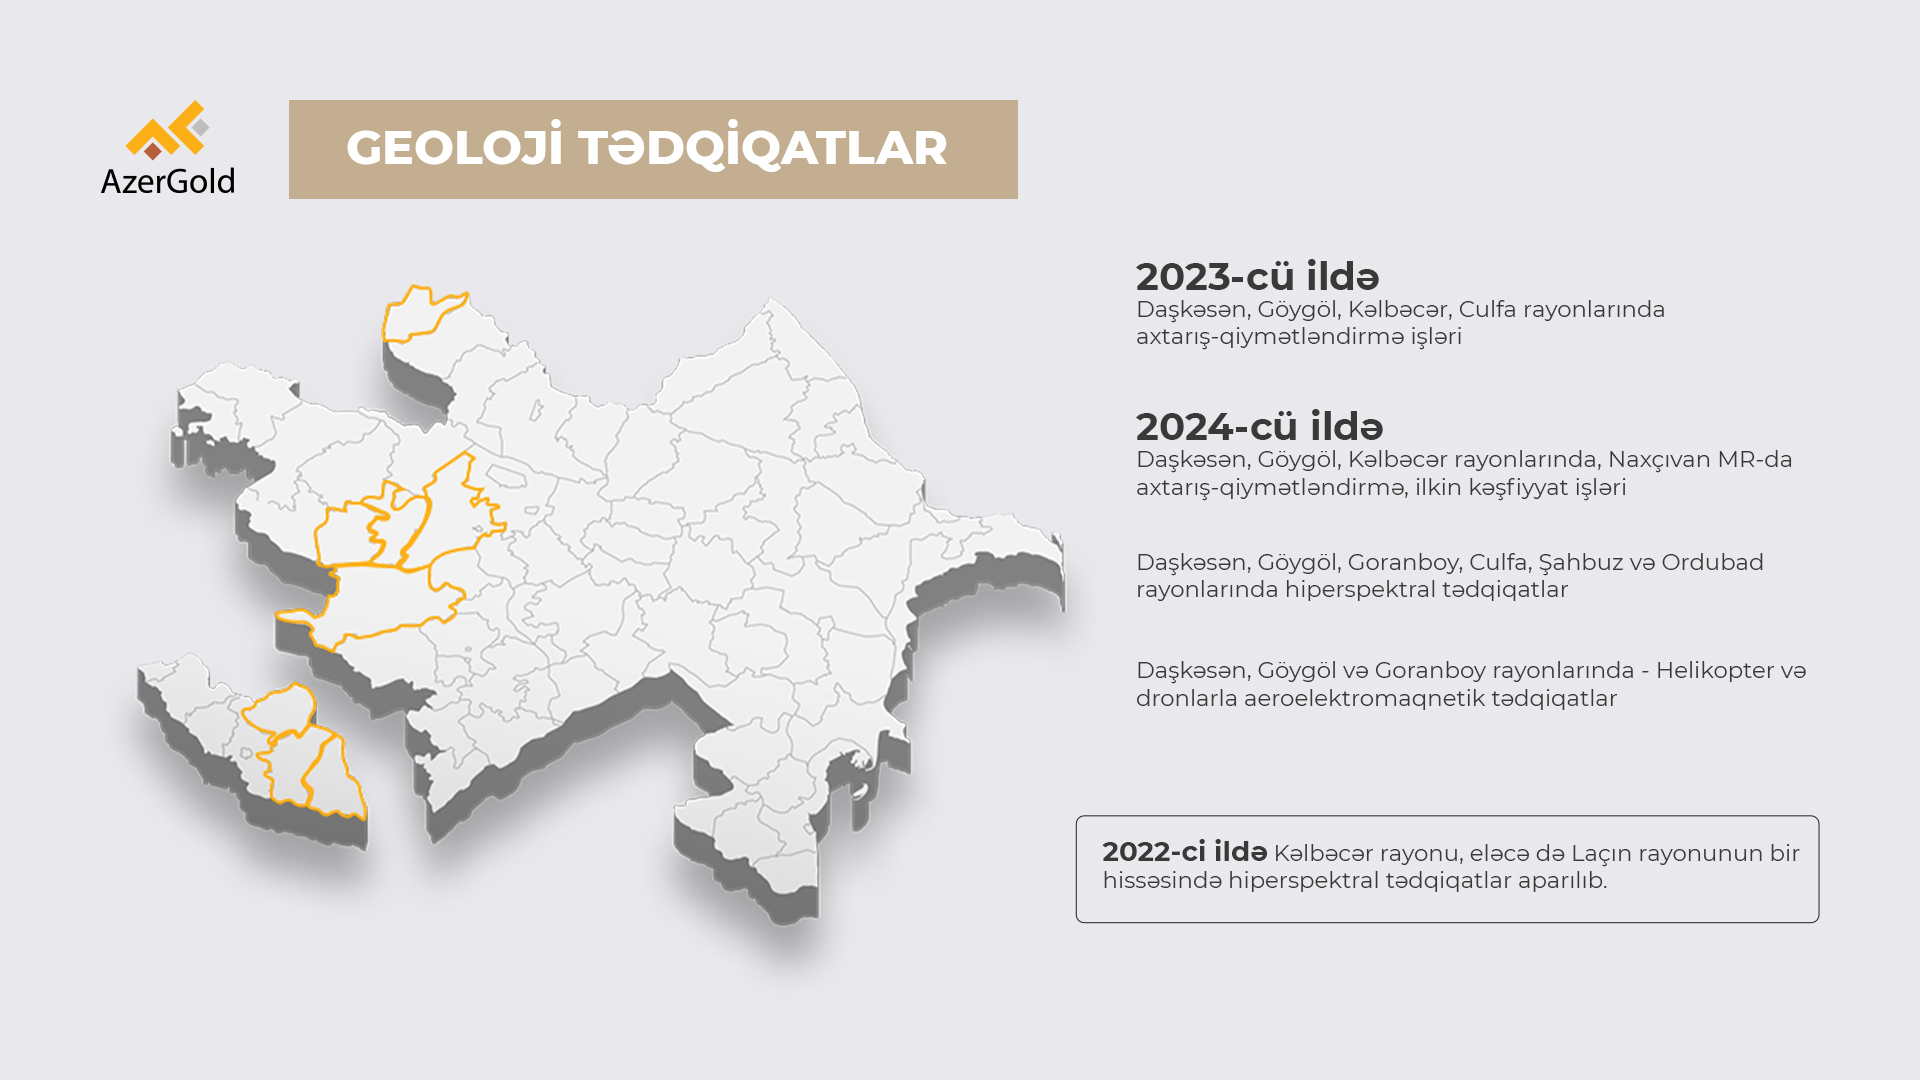 AzerGold CJSC to Expand the Implementation of Innovative Technologies in Geological Exploration